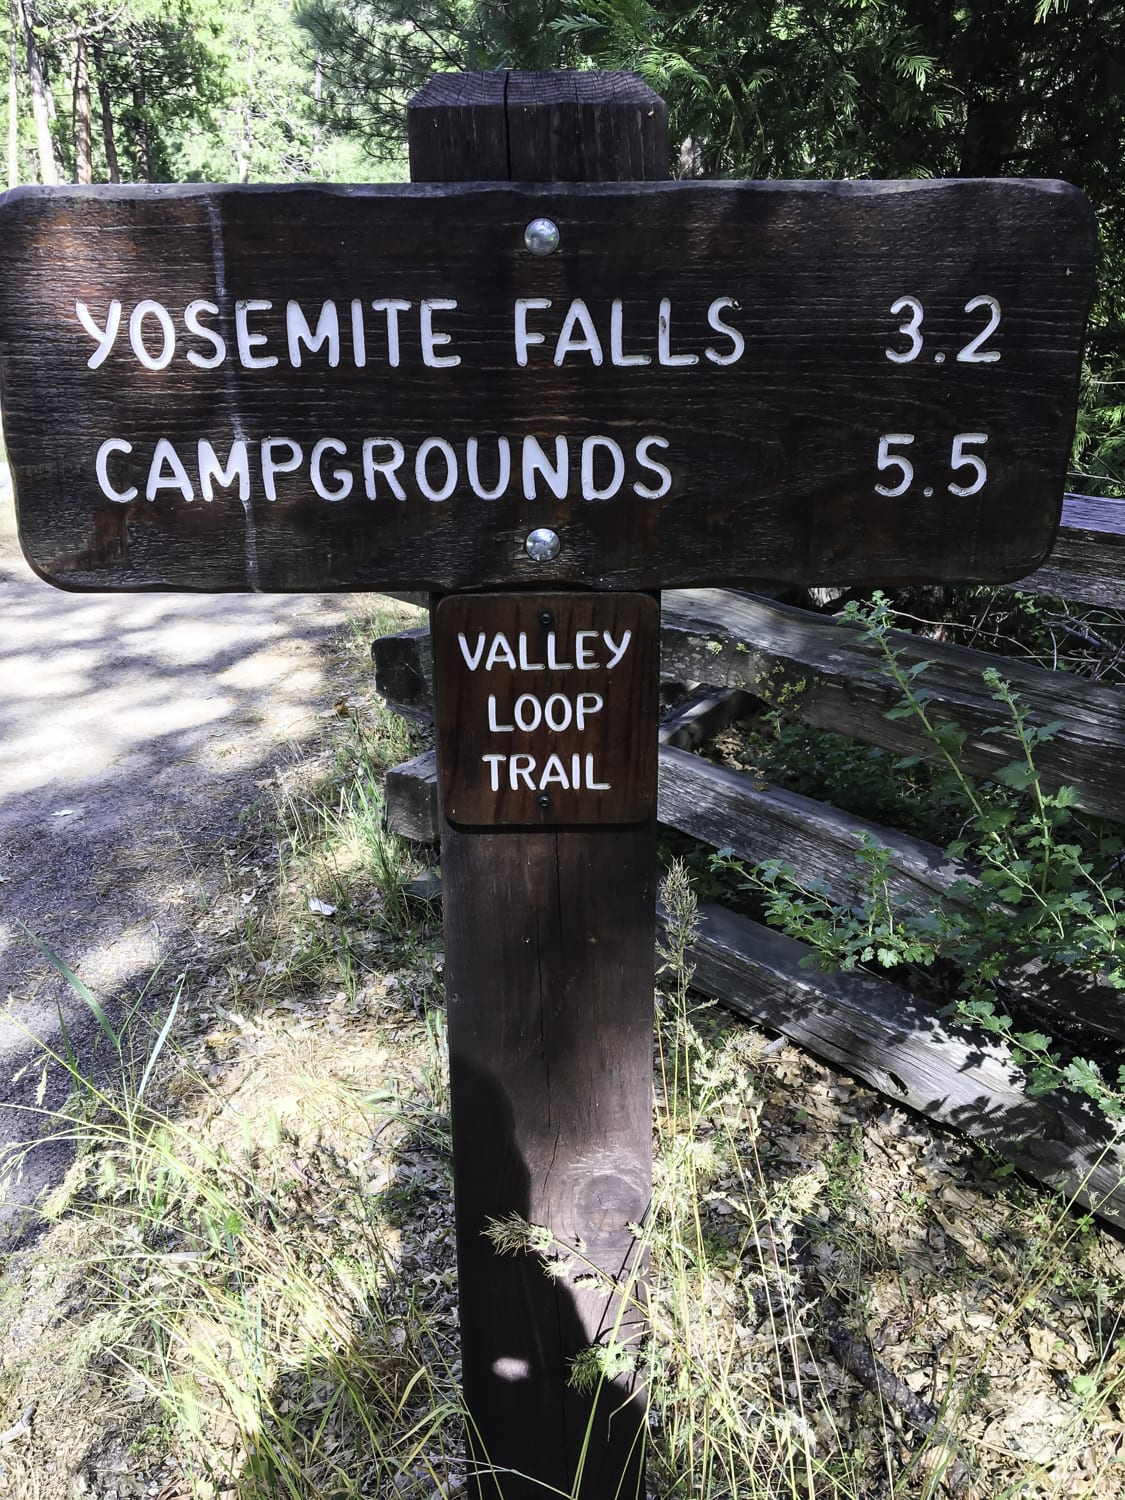 Yosemite Valley Loop Trail signs direct the way...most of the time.